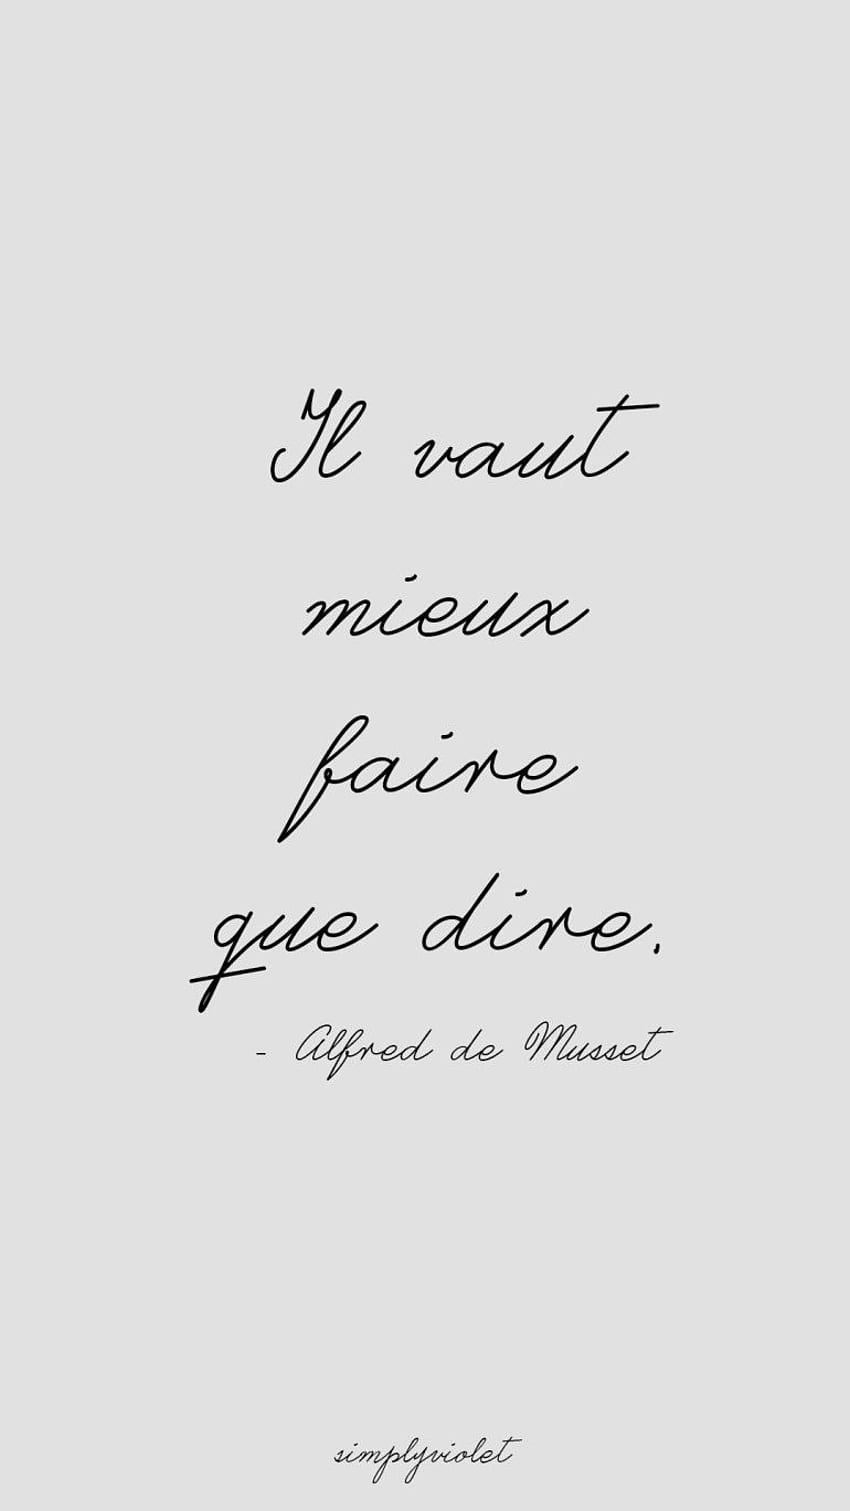 5 Motivational Quotes in French to Help You Study NOW!